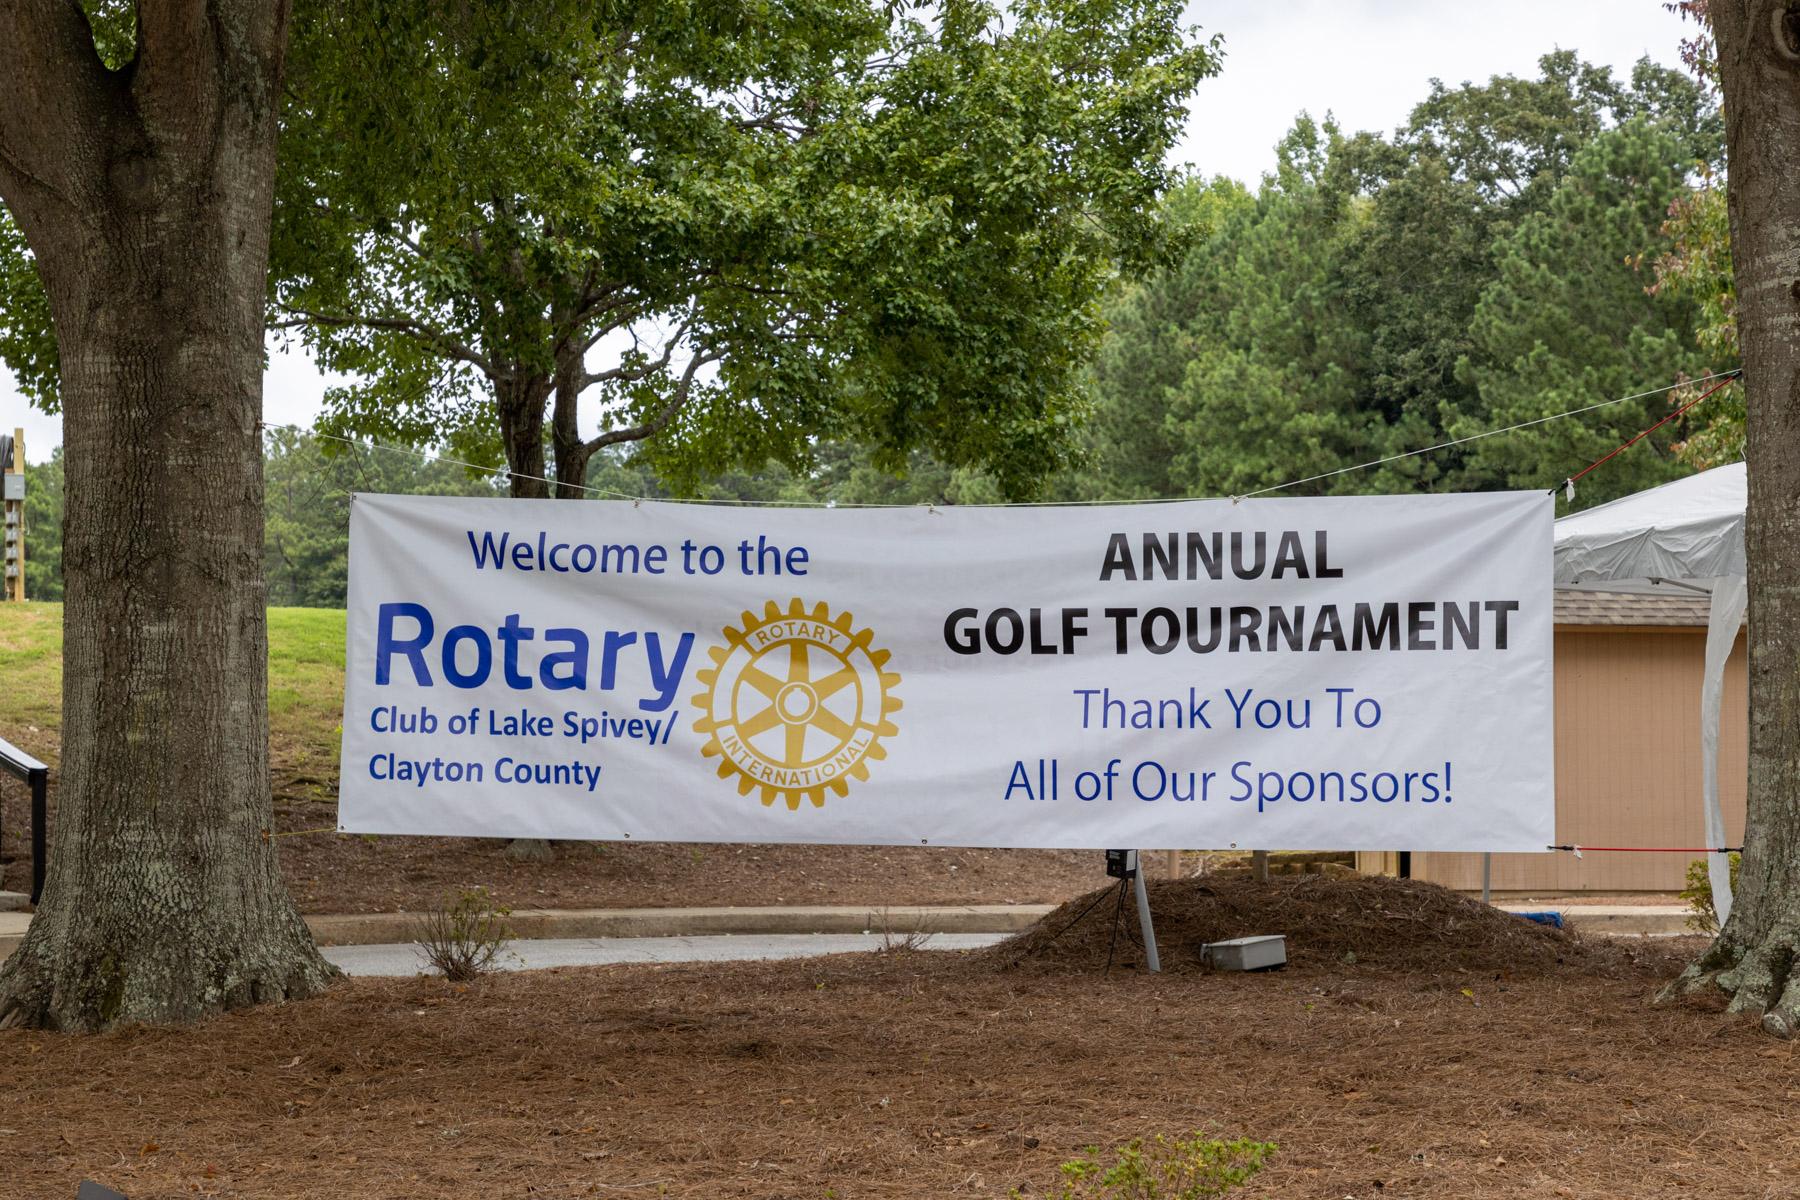 Annual Rotary Club -Lake Spivey/Clayton County Golf Tournament Fundraiser